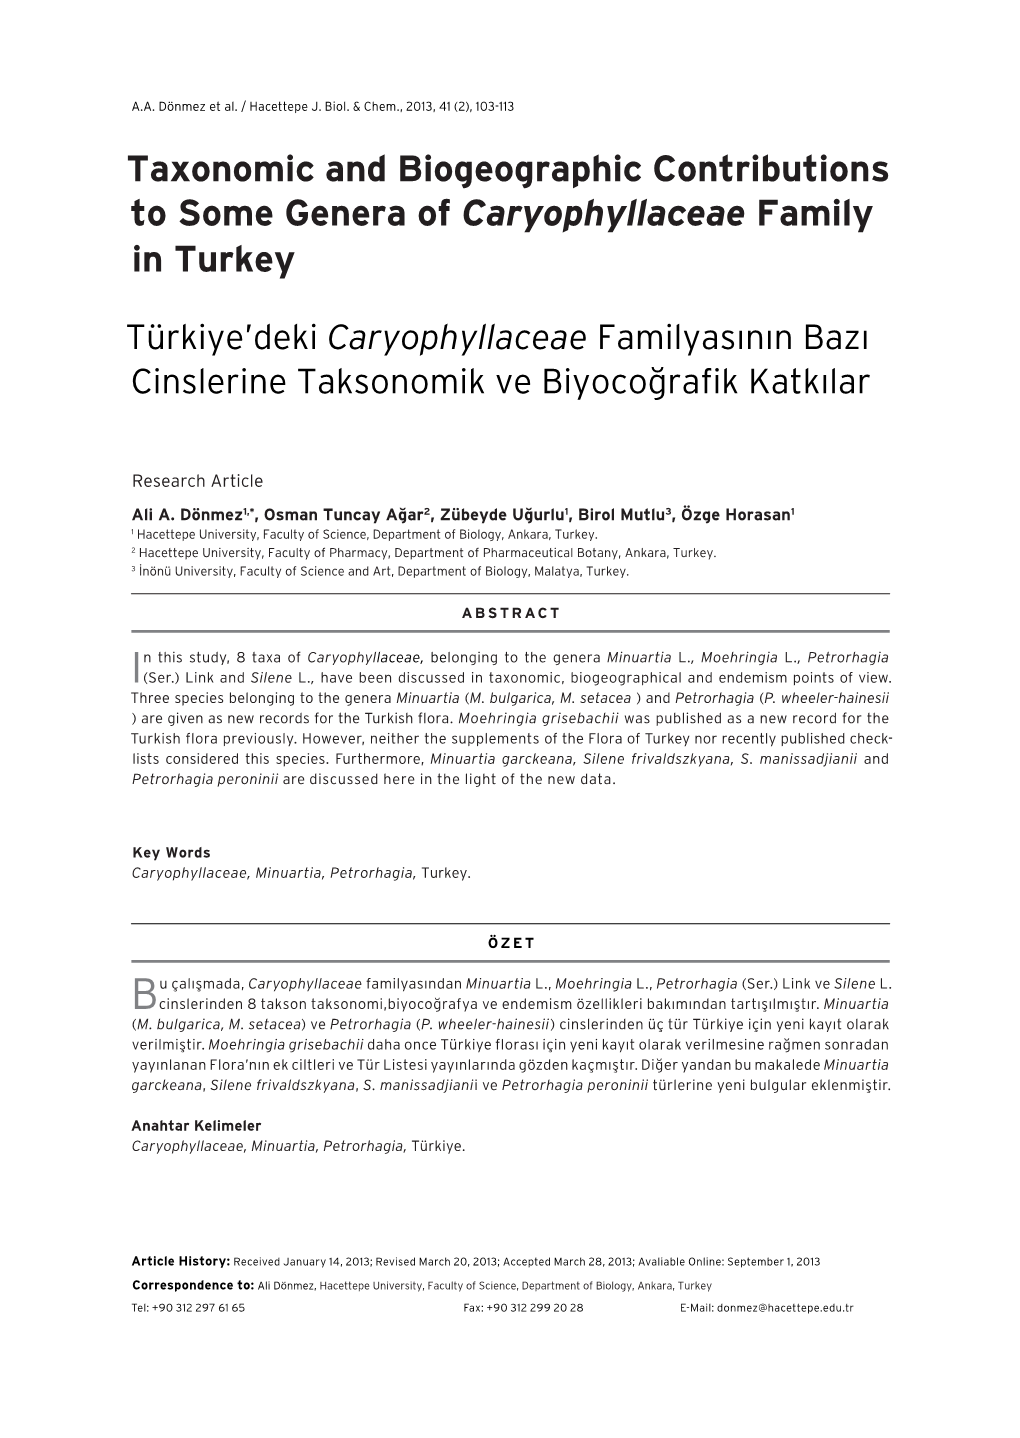 Taxonomic and Biogeographic Contributions to Some Genera of Caryophyllaceae Family in Turkey